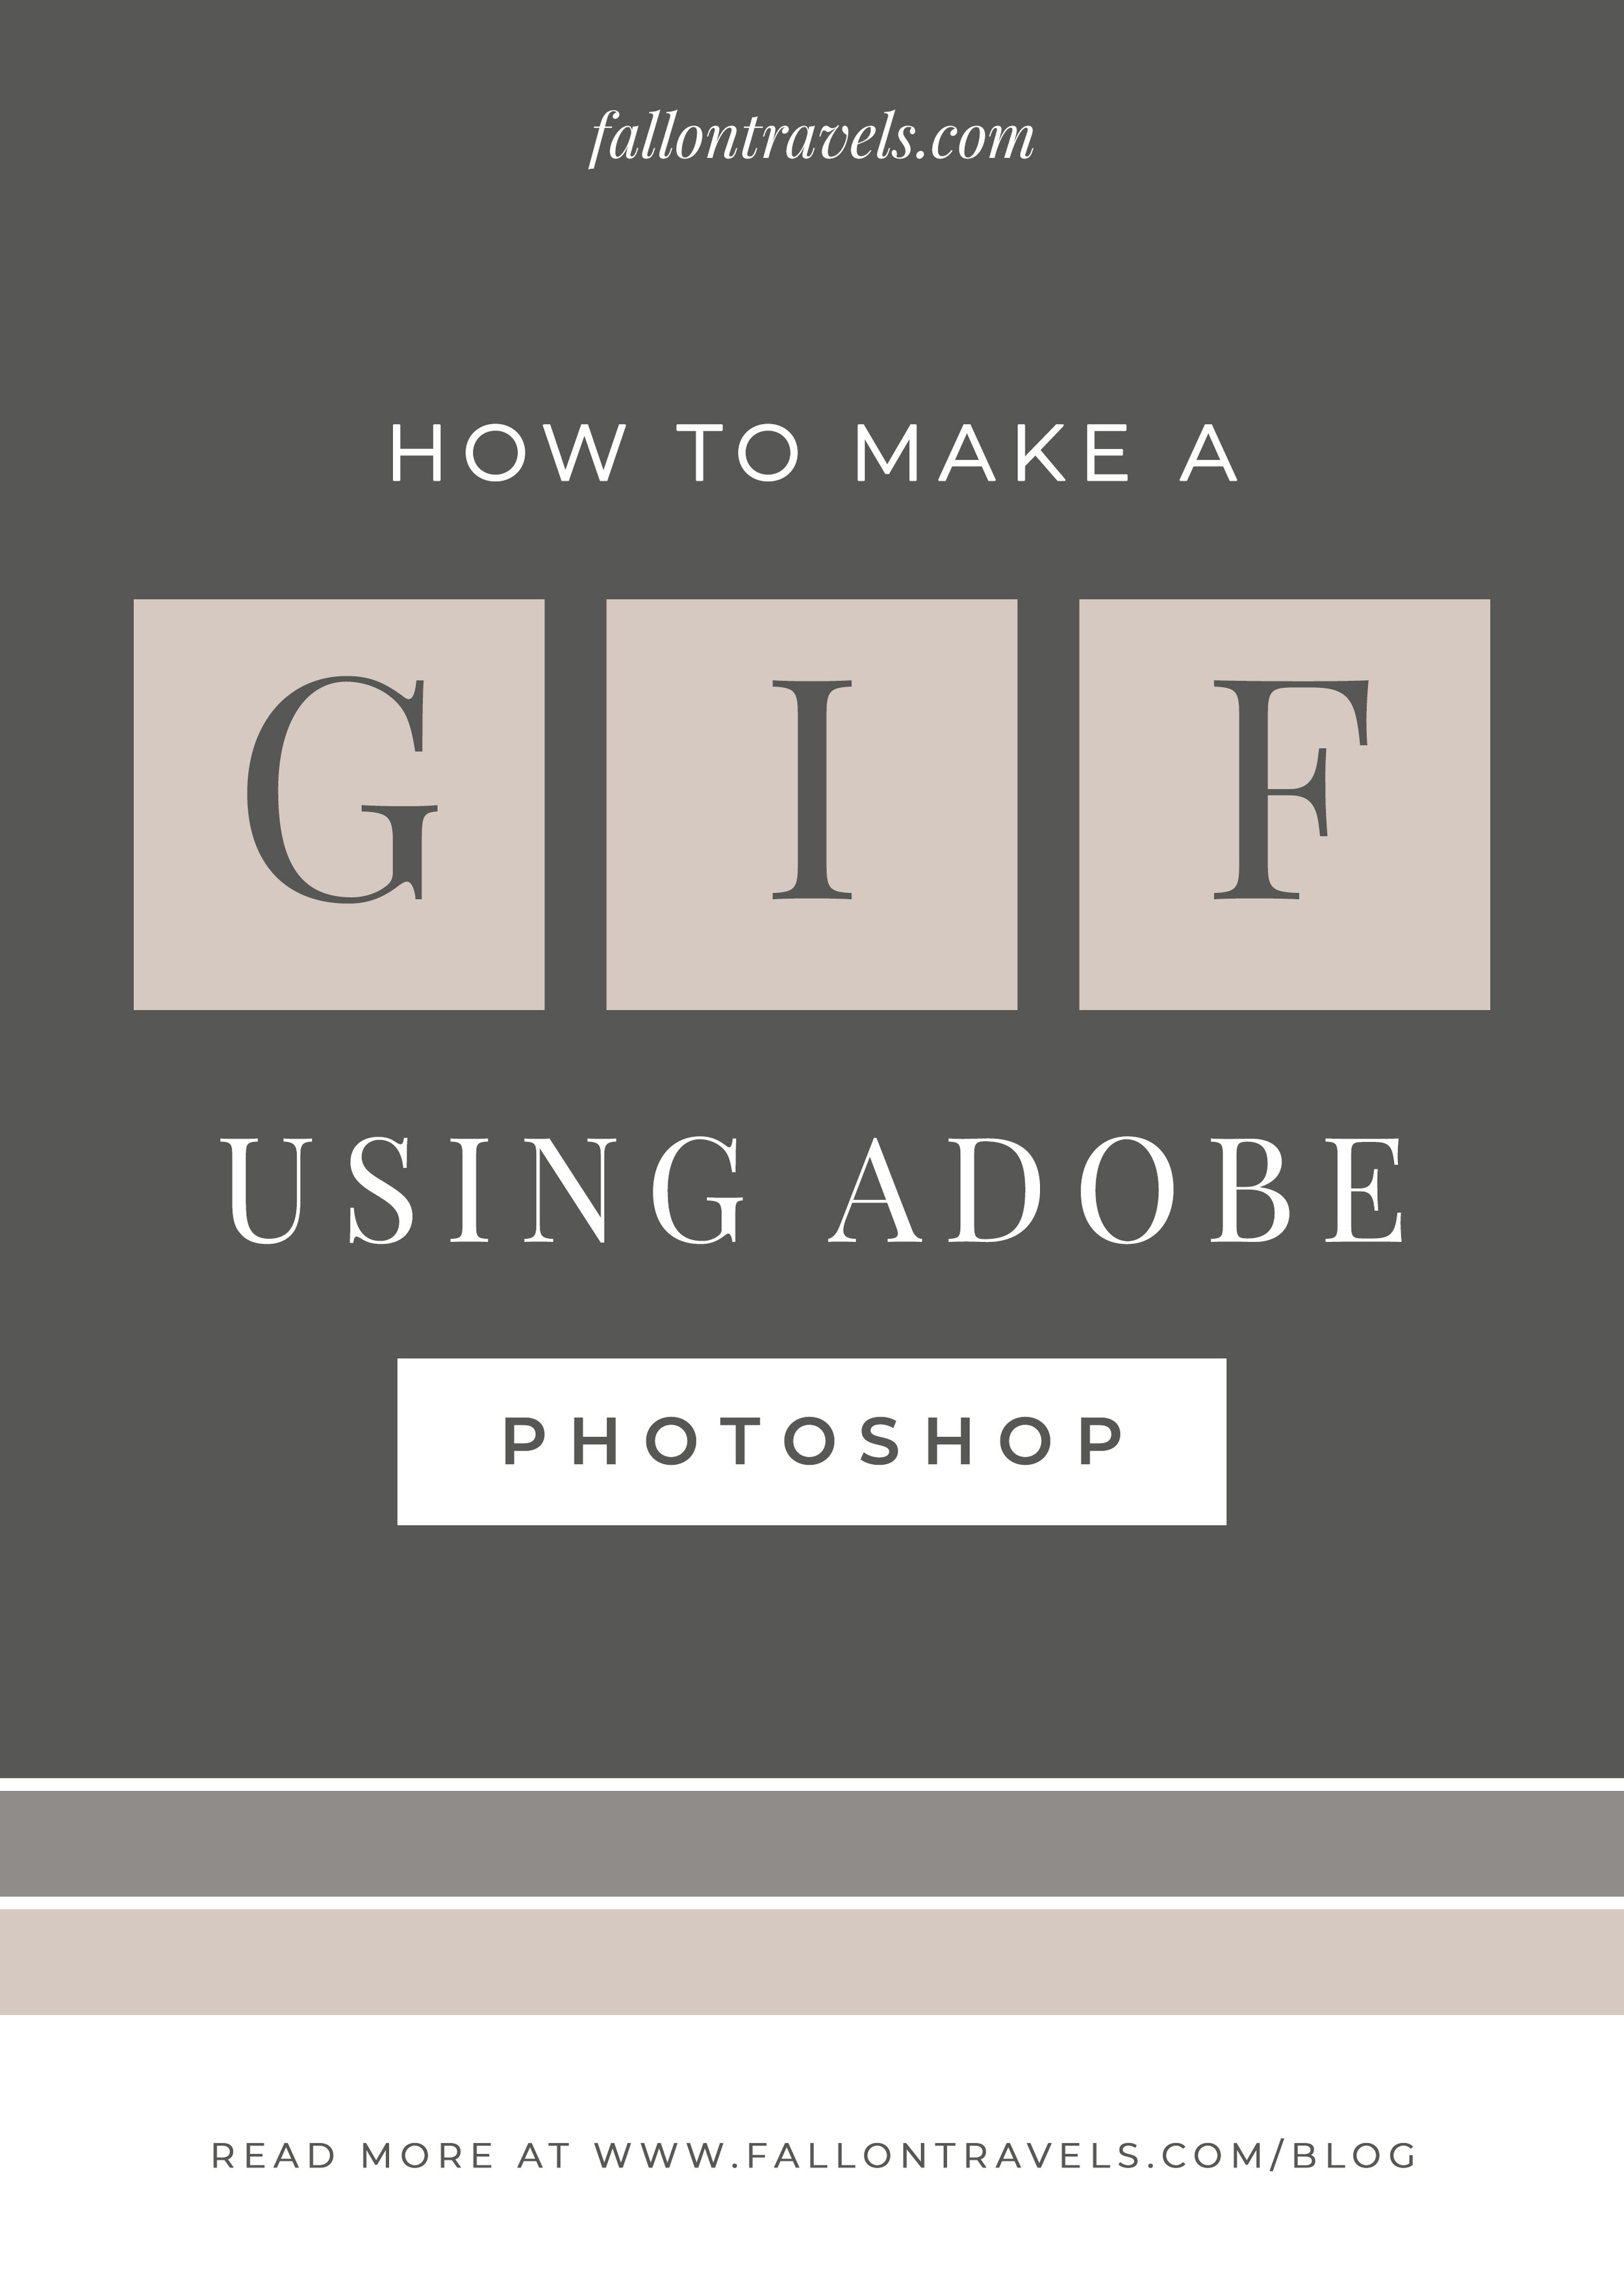 Concrete Guide to Create GIF from Images in Photoshop and More